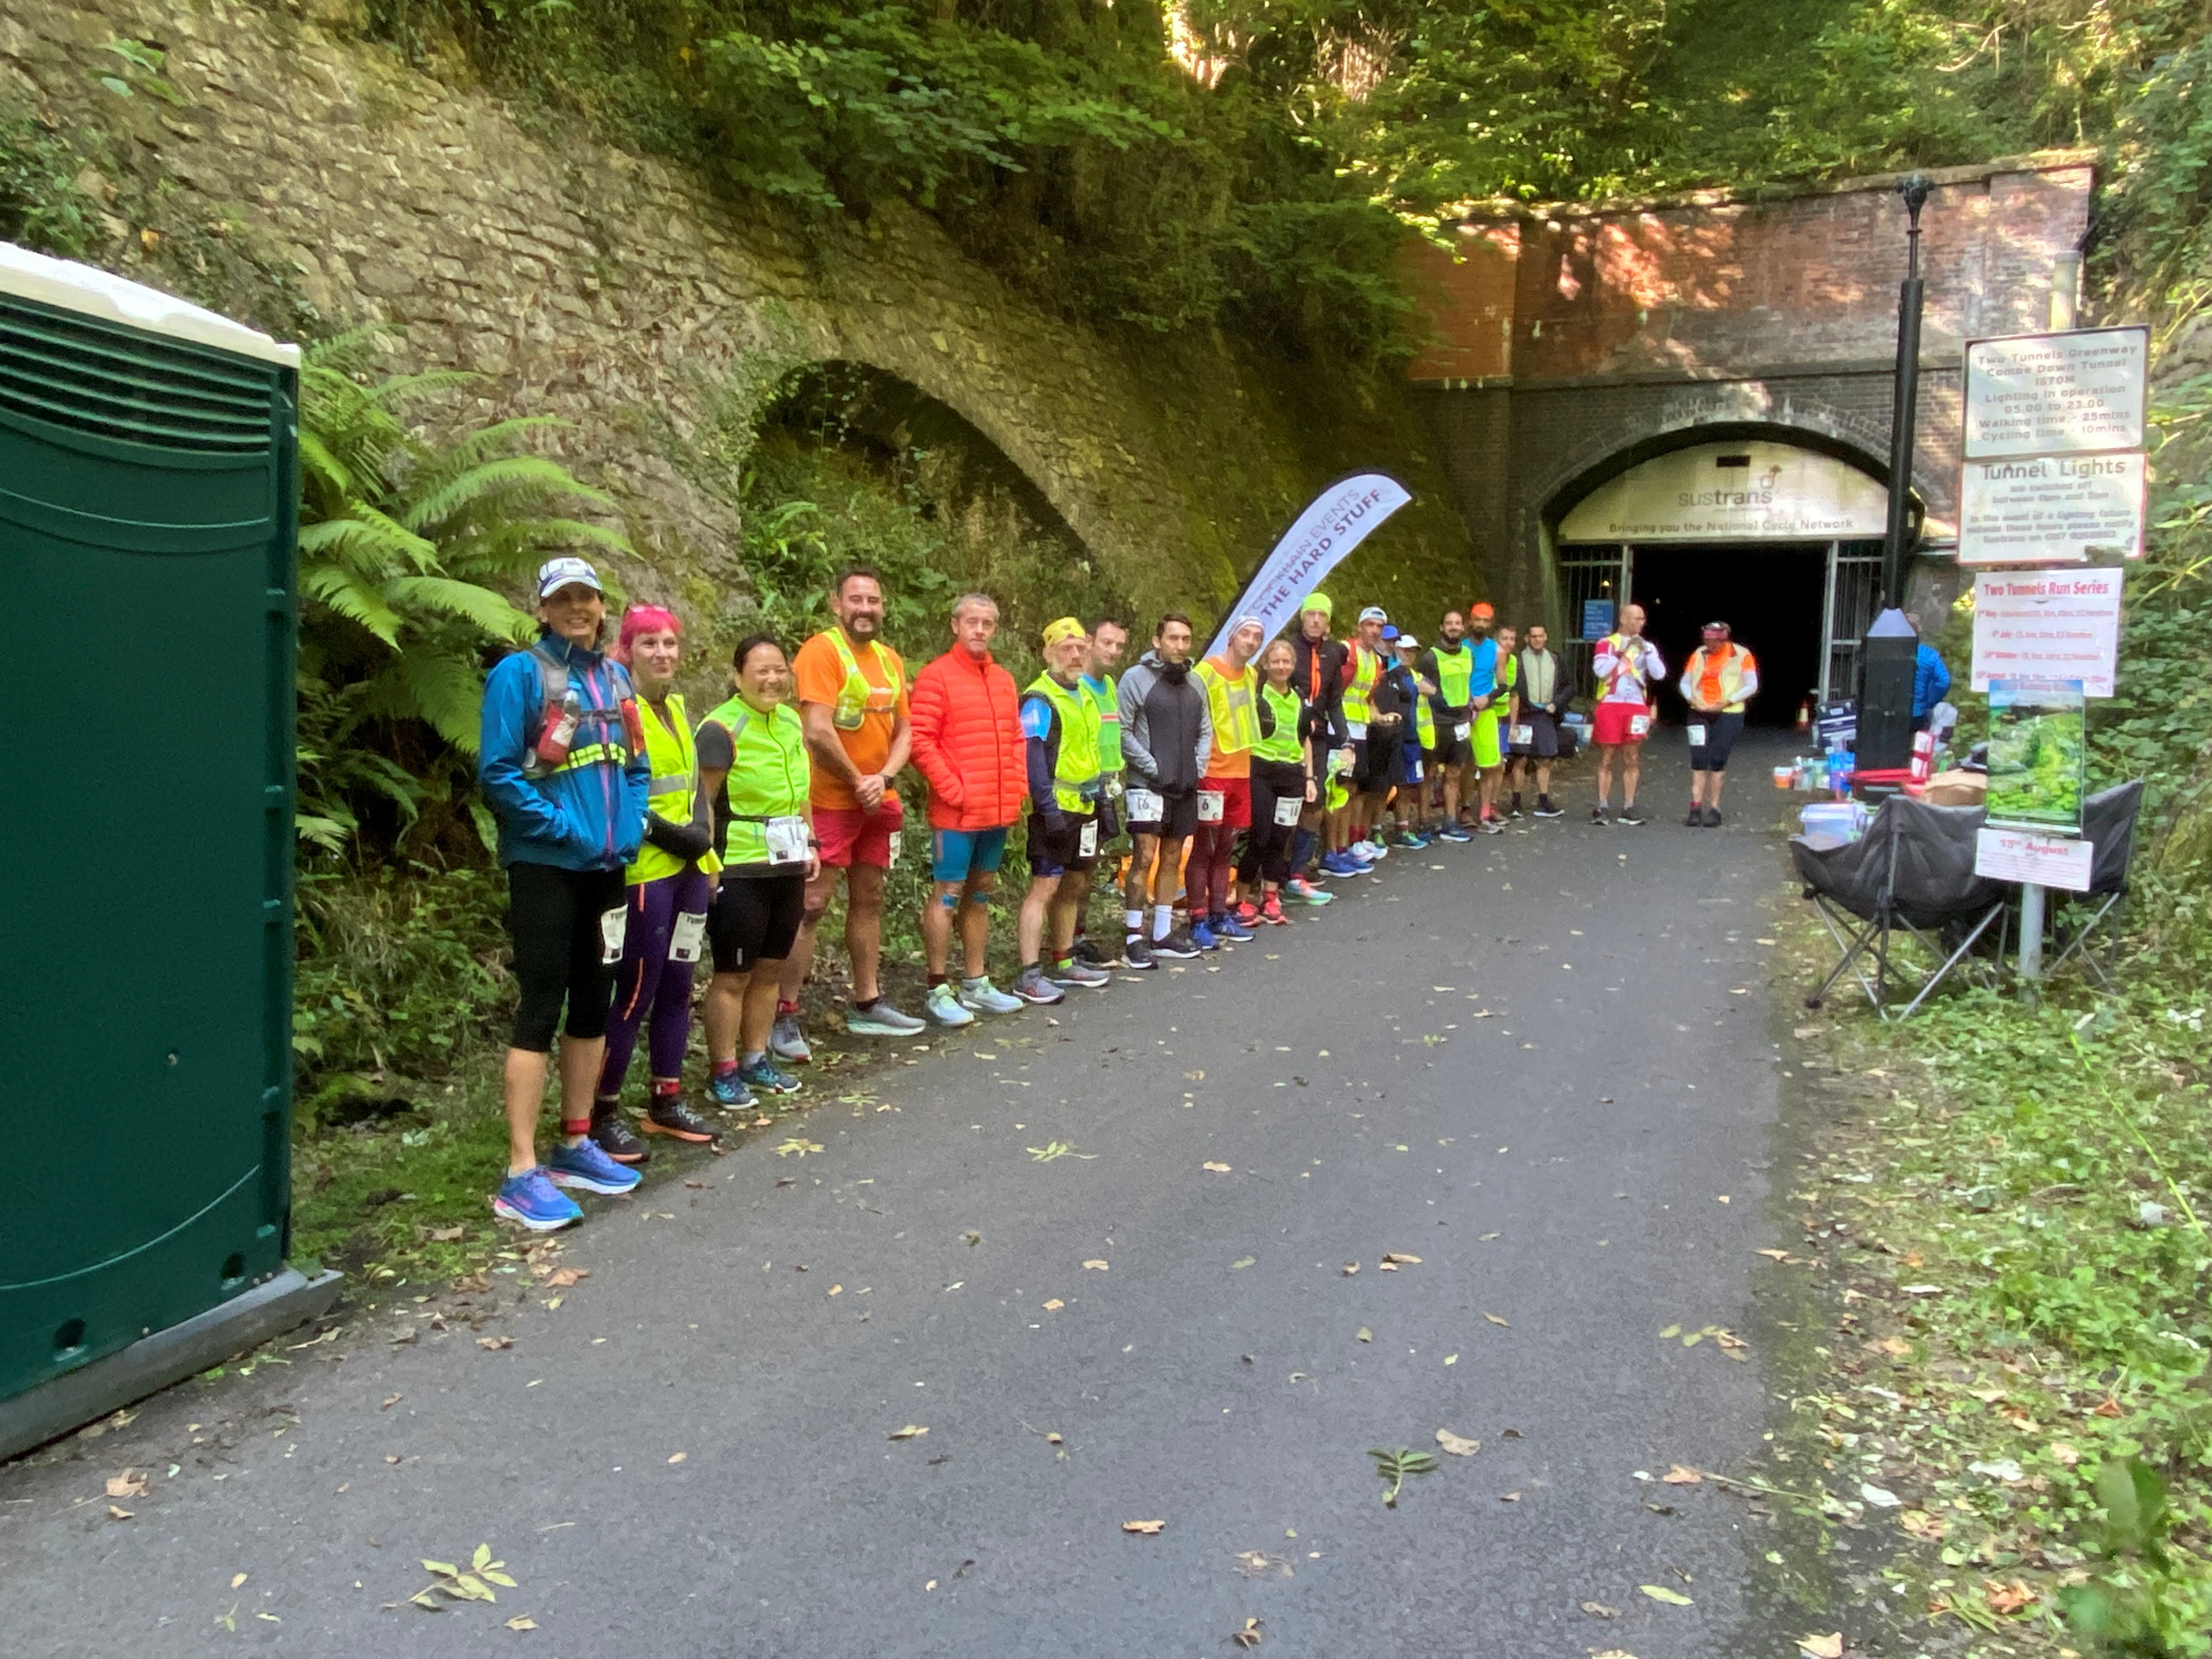 'The Tunnel', a 200 mile run inside the Combe Down Tunnel in Bath